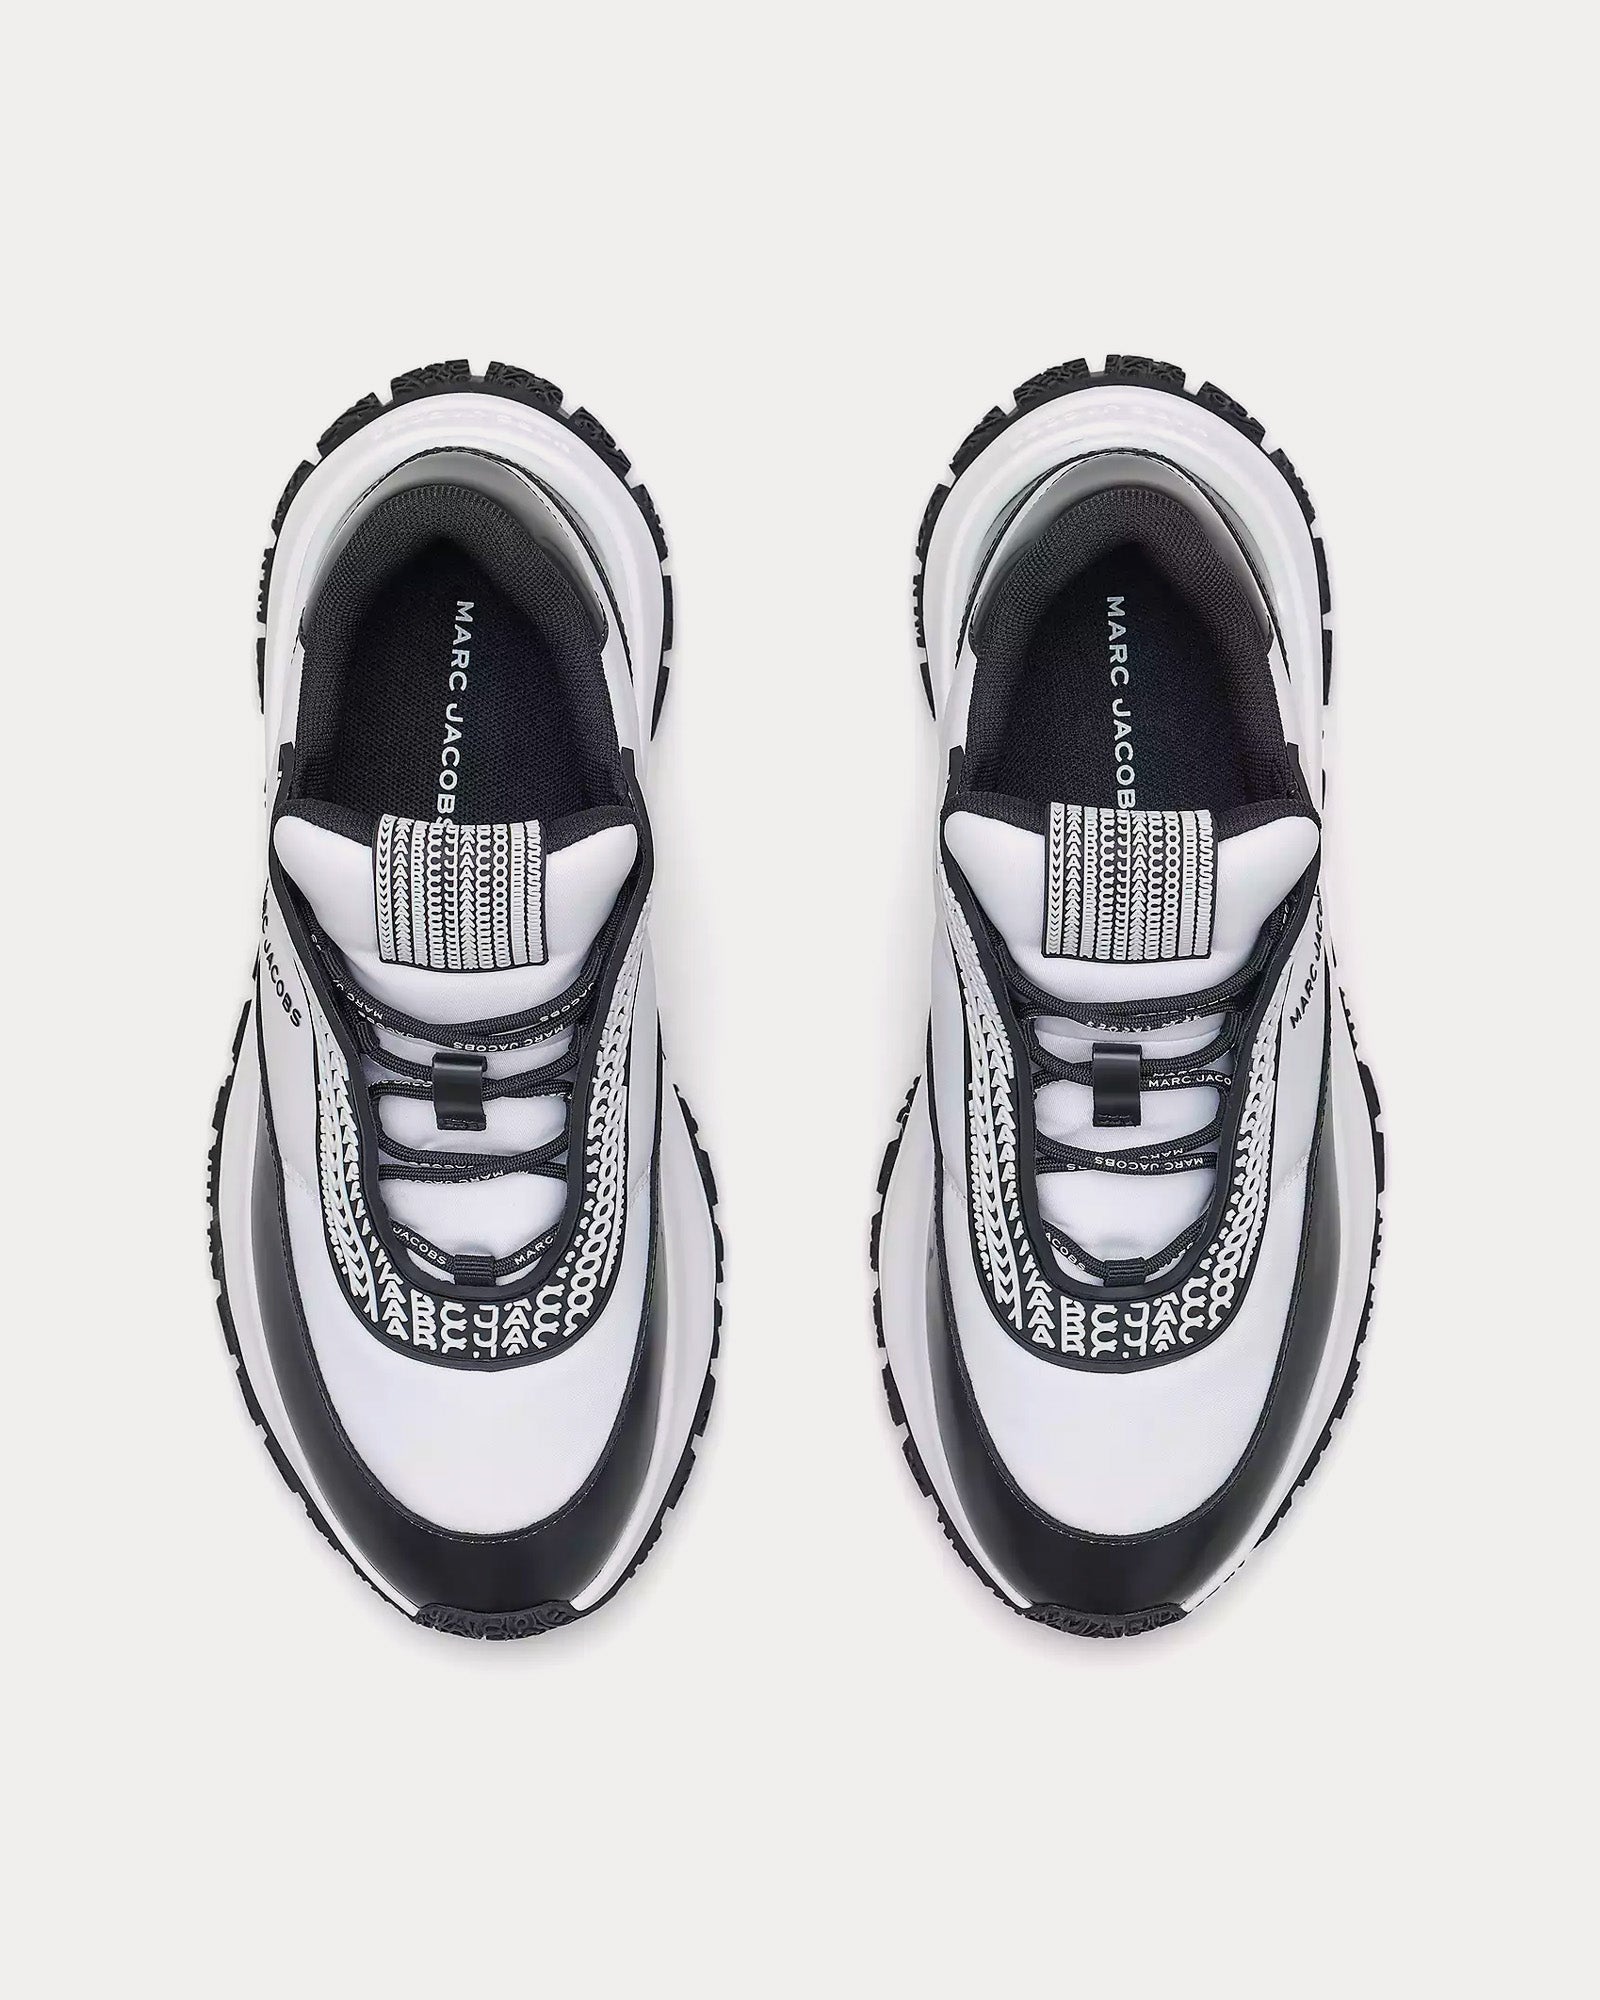 Marc Jacobs - The Lazy Runner White / Black Low Top Sneakers